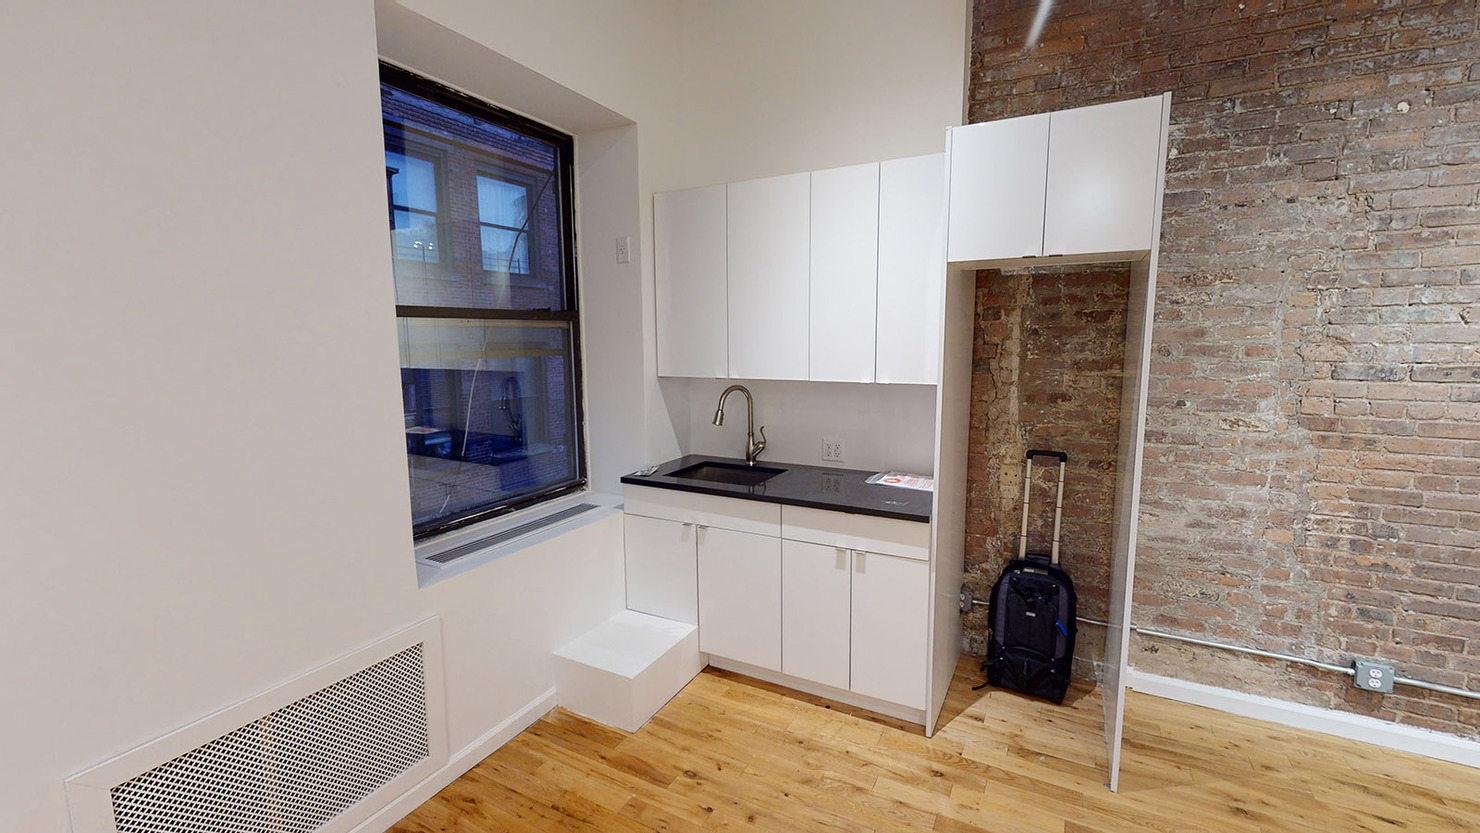 39 West 14th Street Office Space - Kitchenette